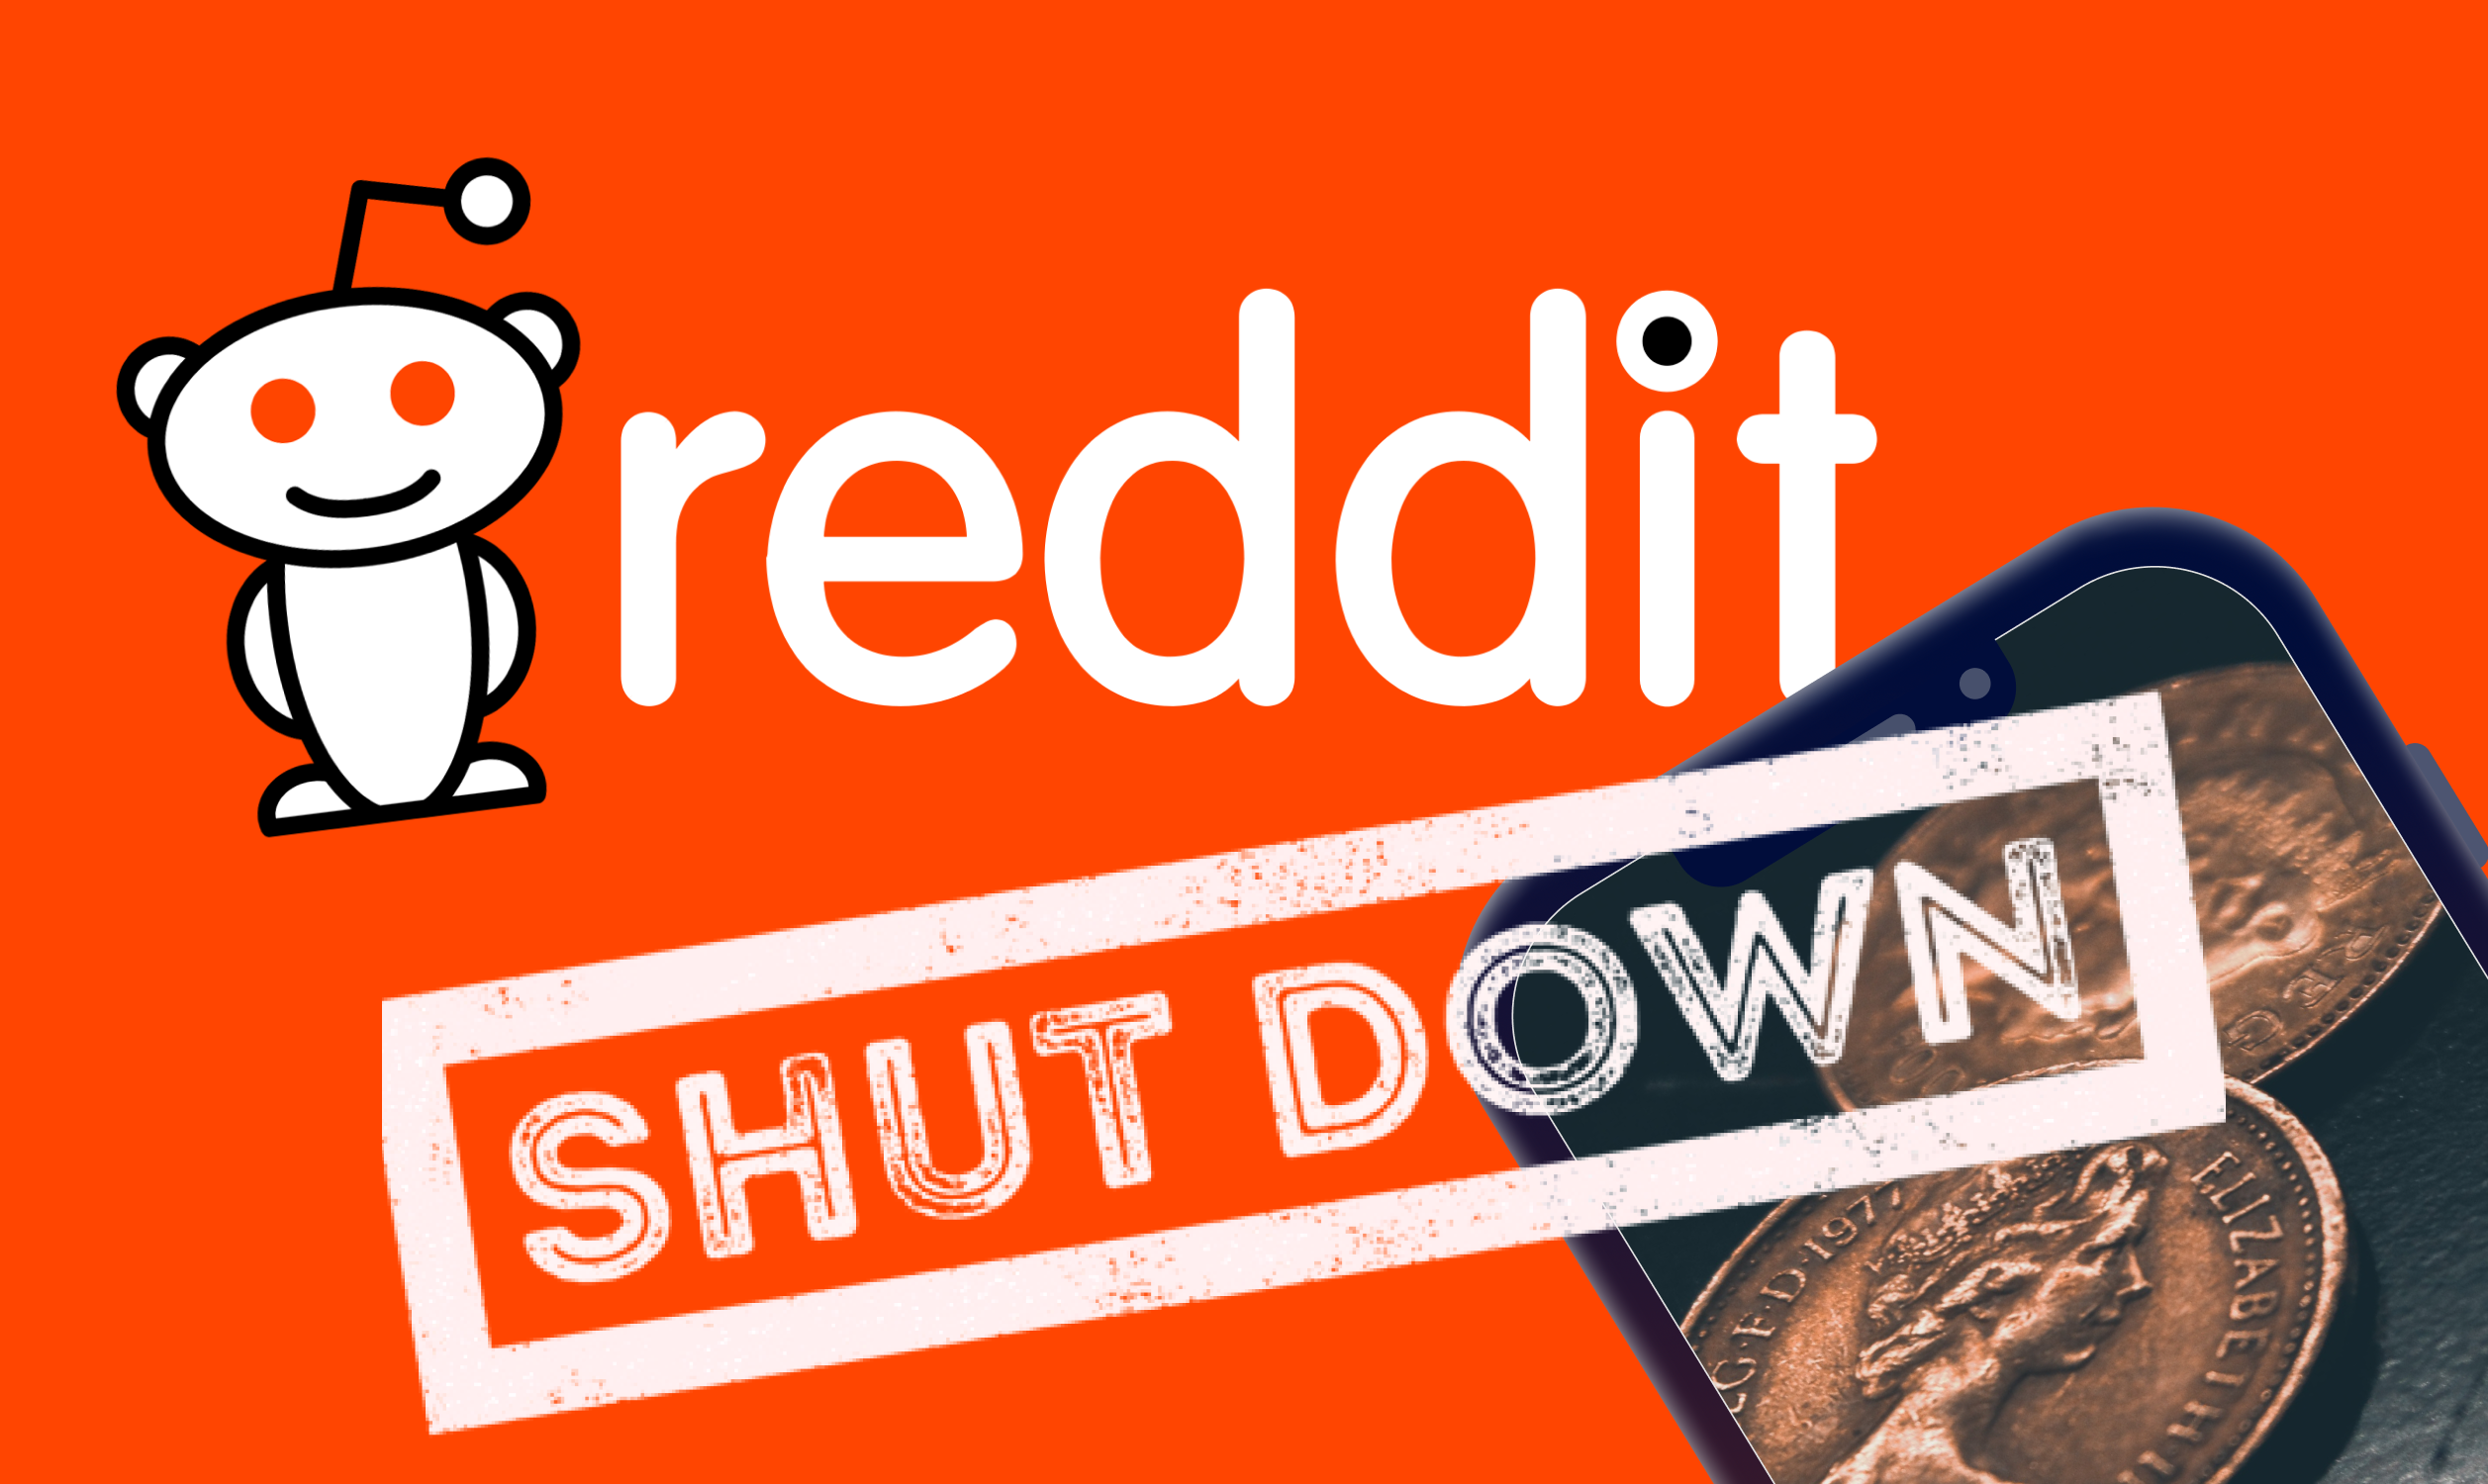 Reddit angers users with sunsetting of coins and awards system